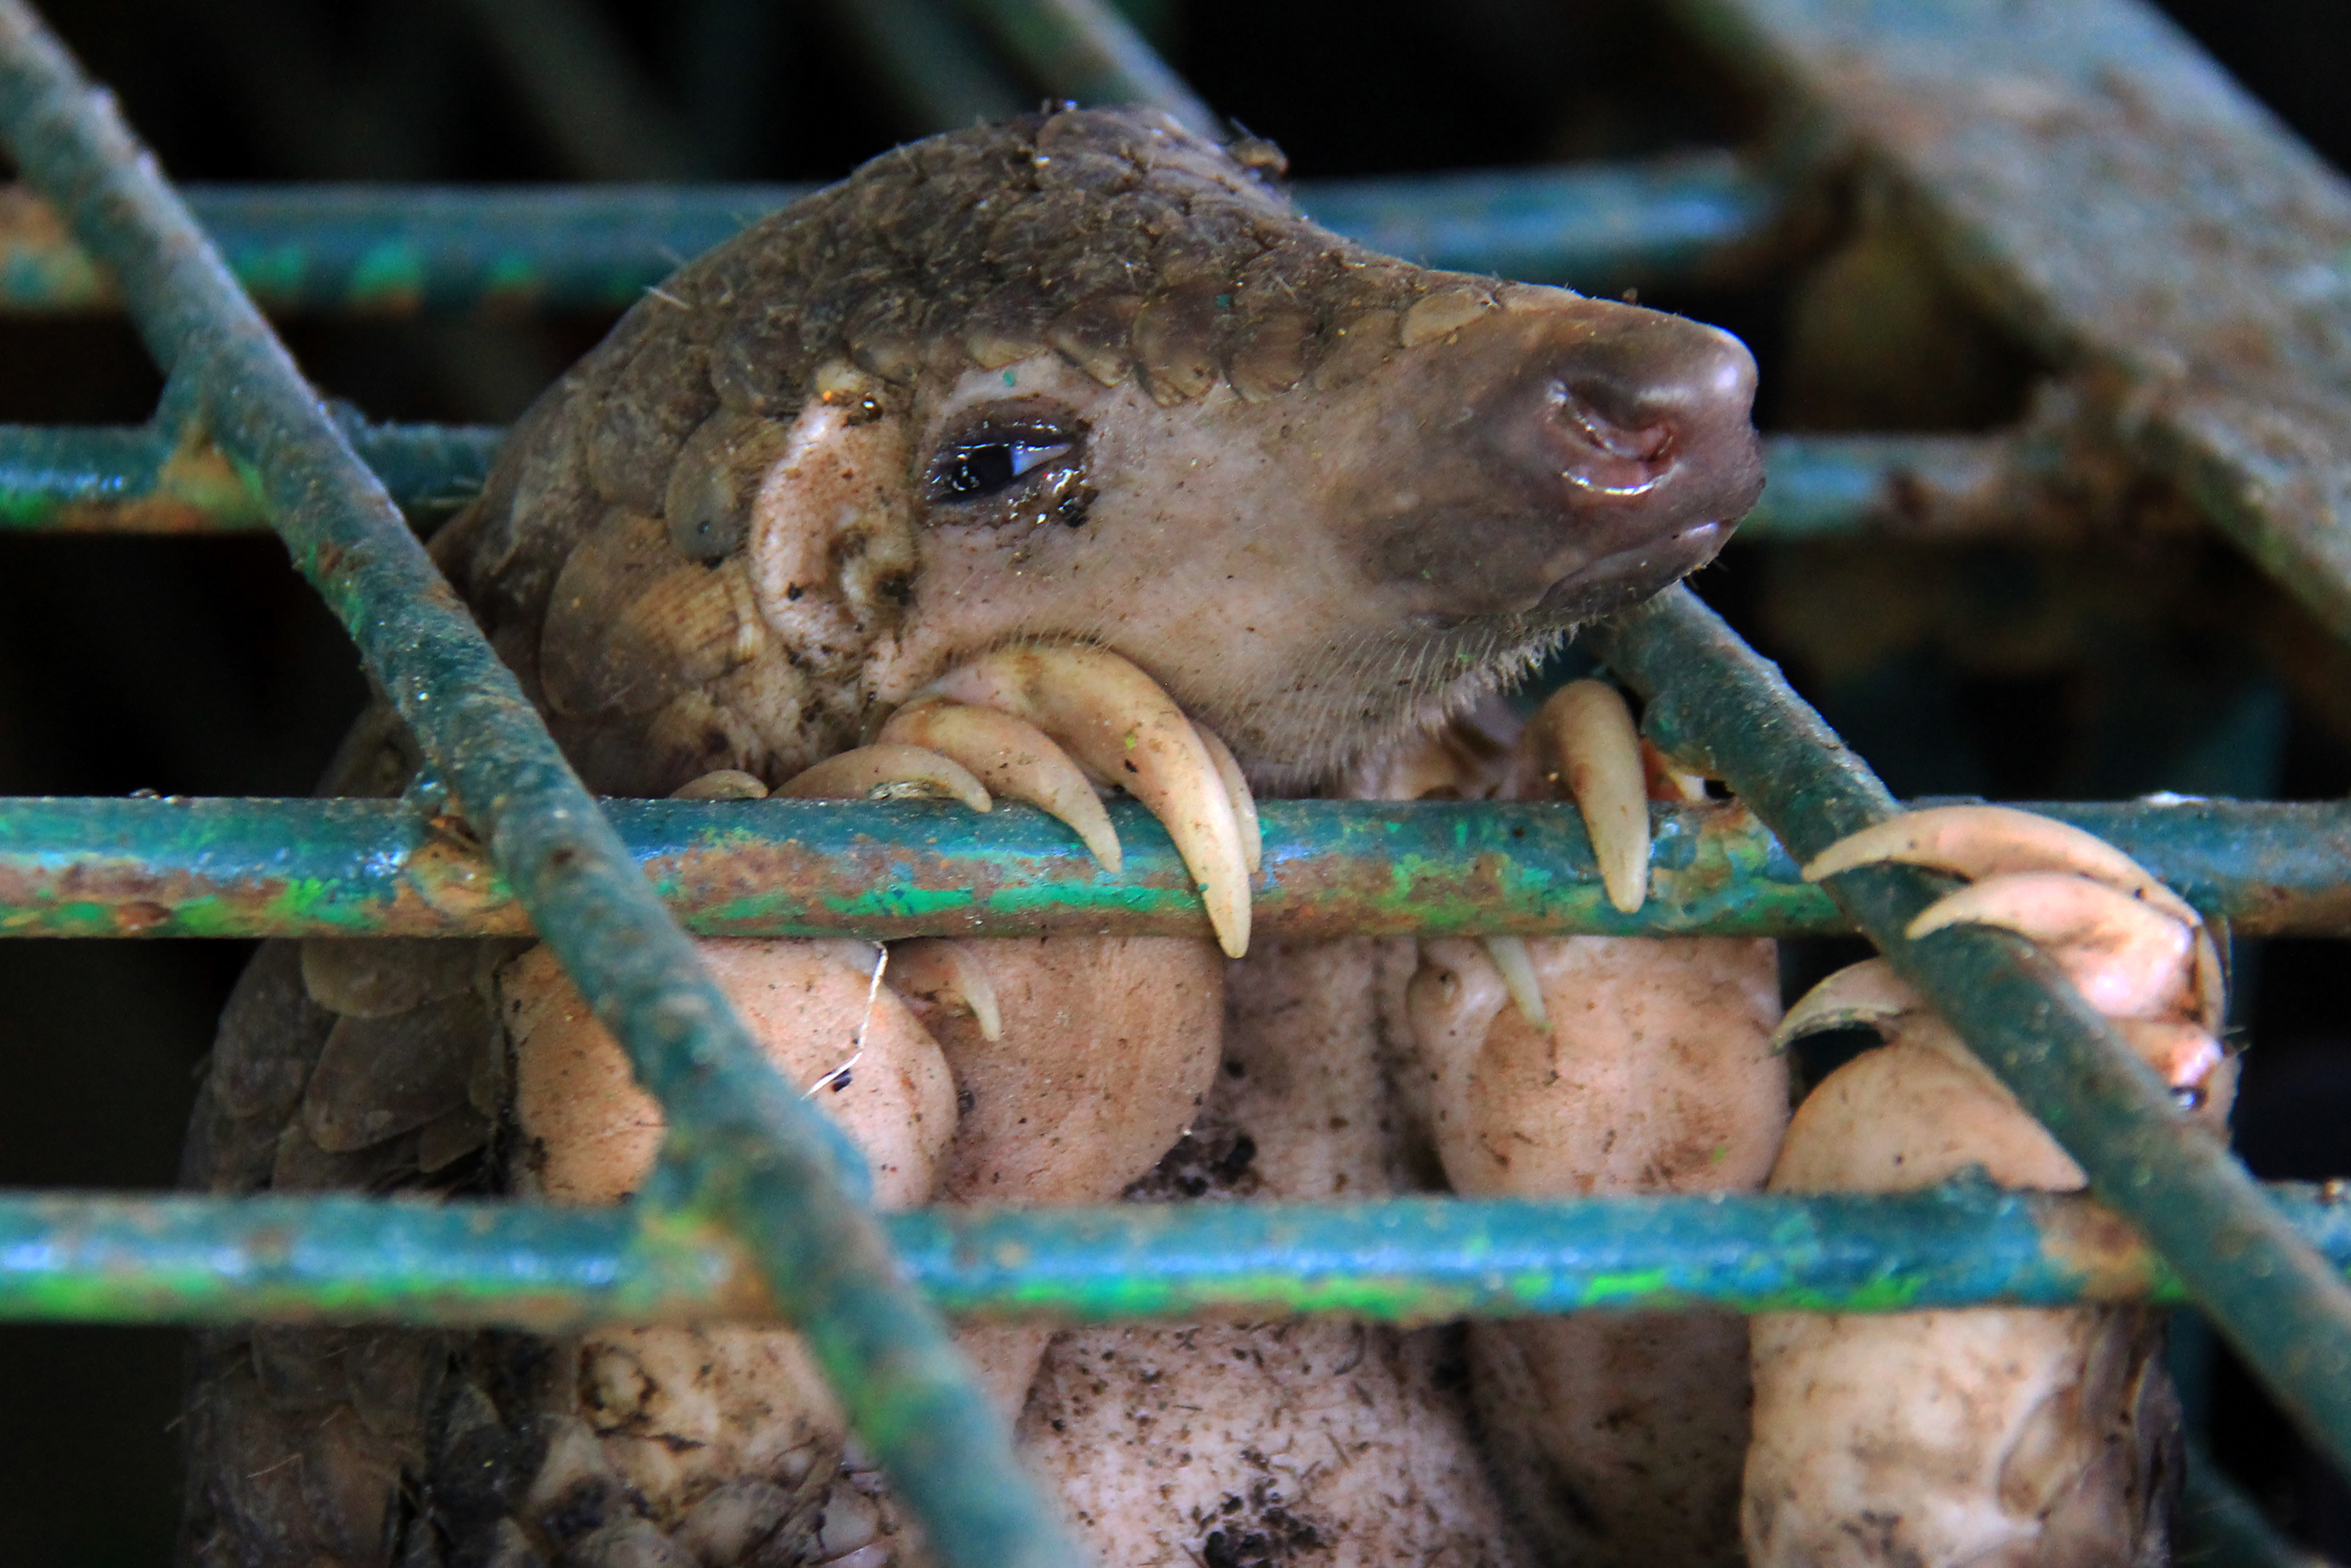 A caged pangolin in Indonesia. Pangolins are the most trafficked mammals worldwide. Photo: Getty Images